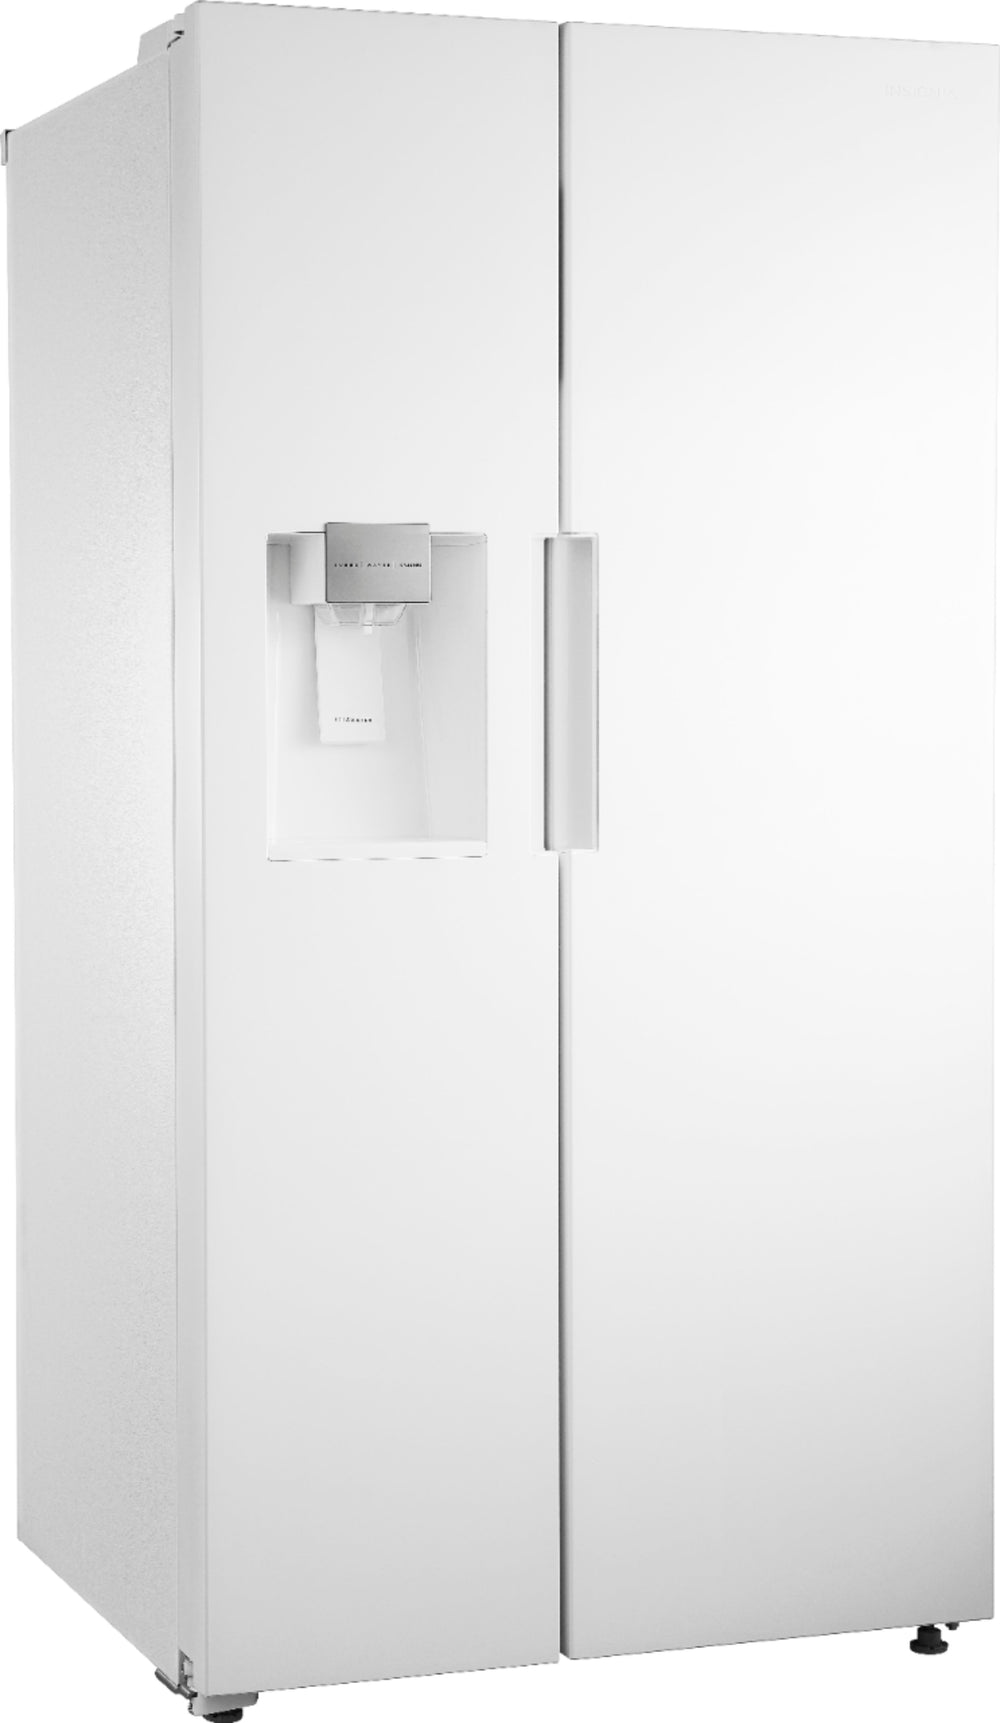 Insignia™ - 26 5/16 Cu. Ft. Side-by-Side Refrigerator - White_1